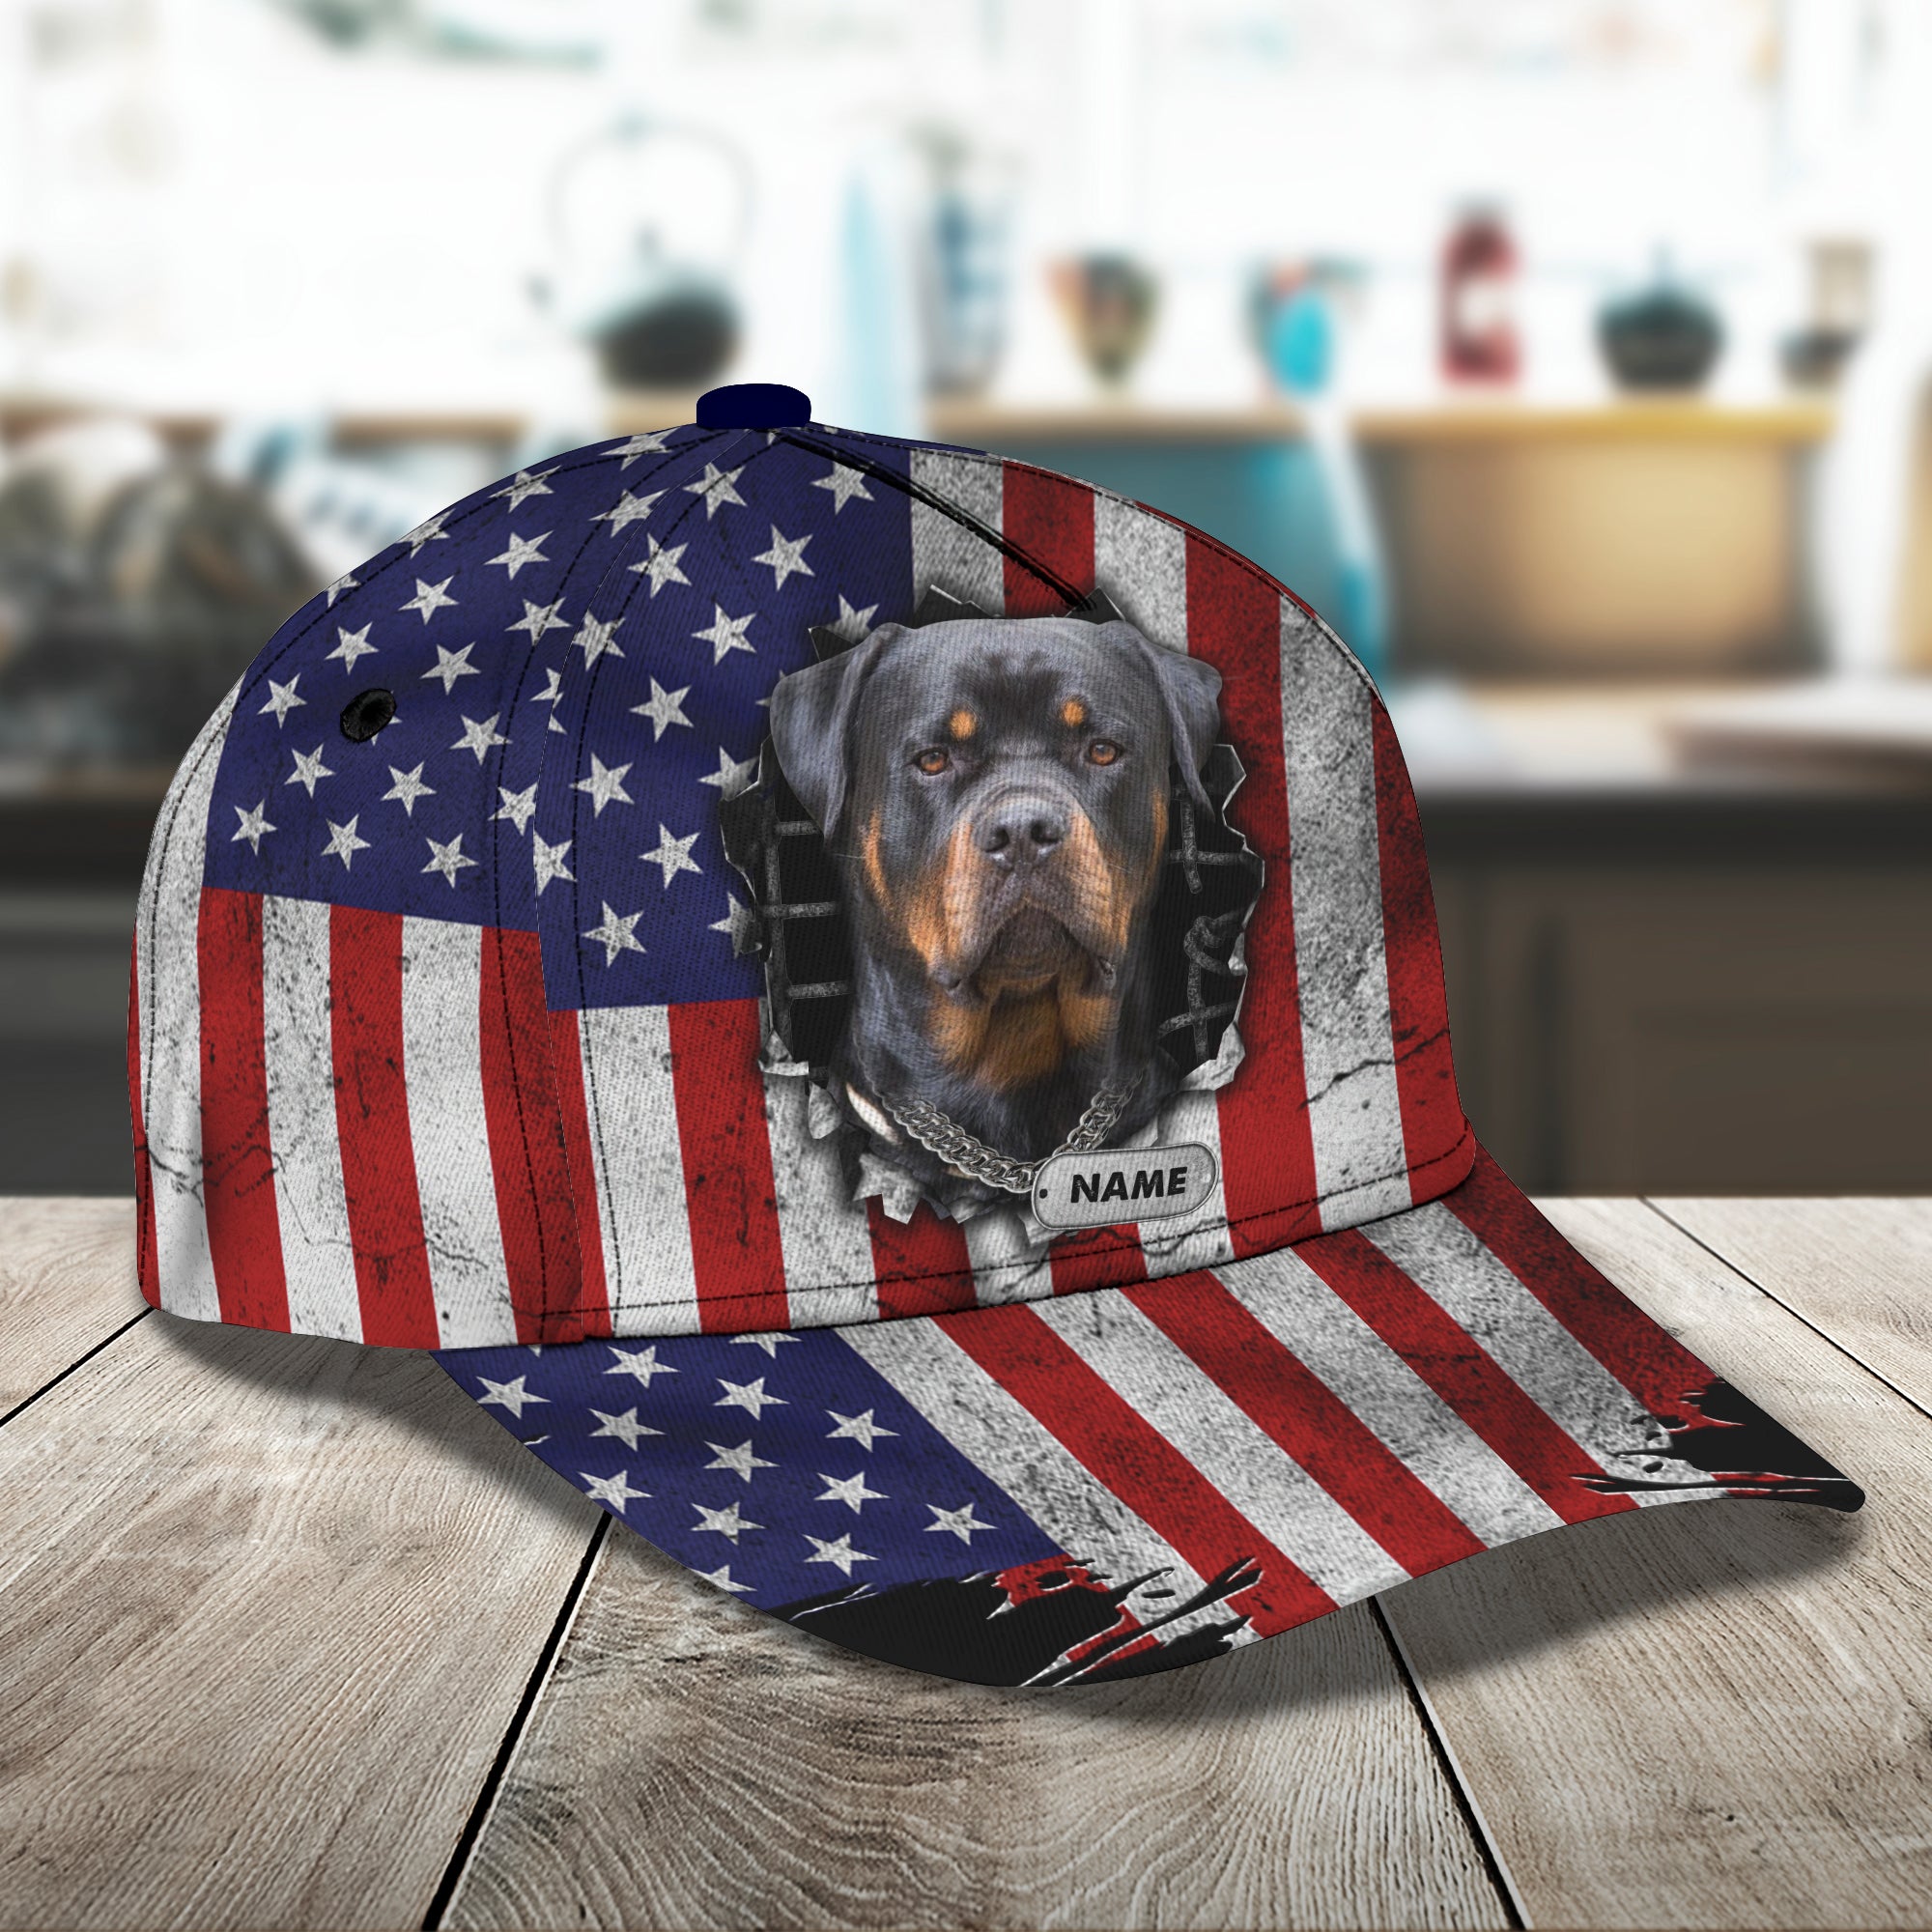 Rottweiler - Personalized Name Cap - Hd98 6